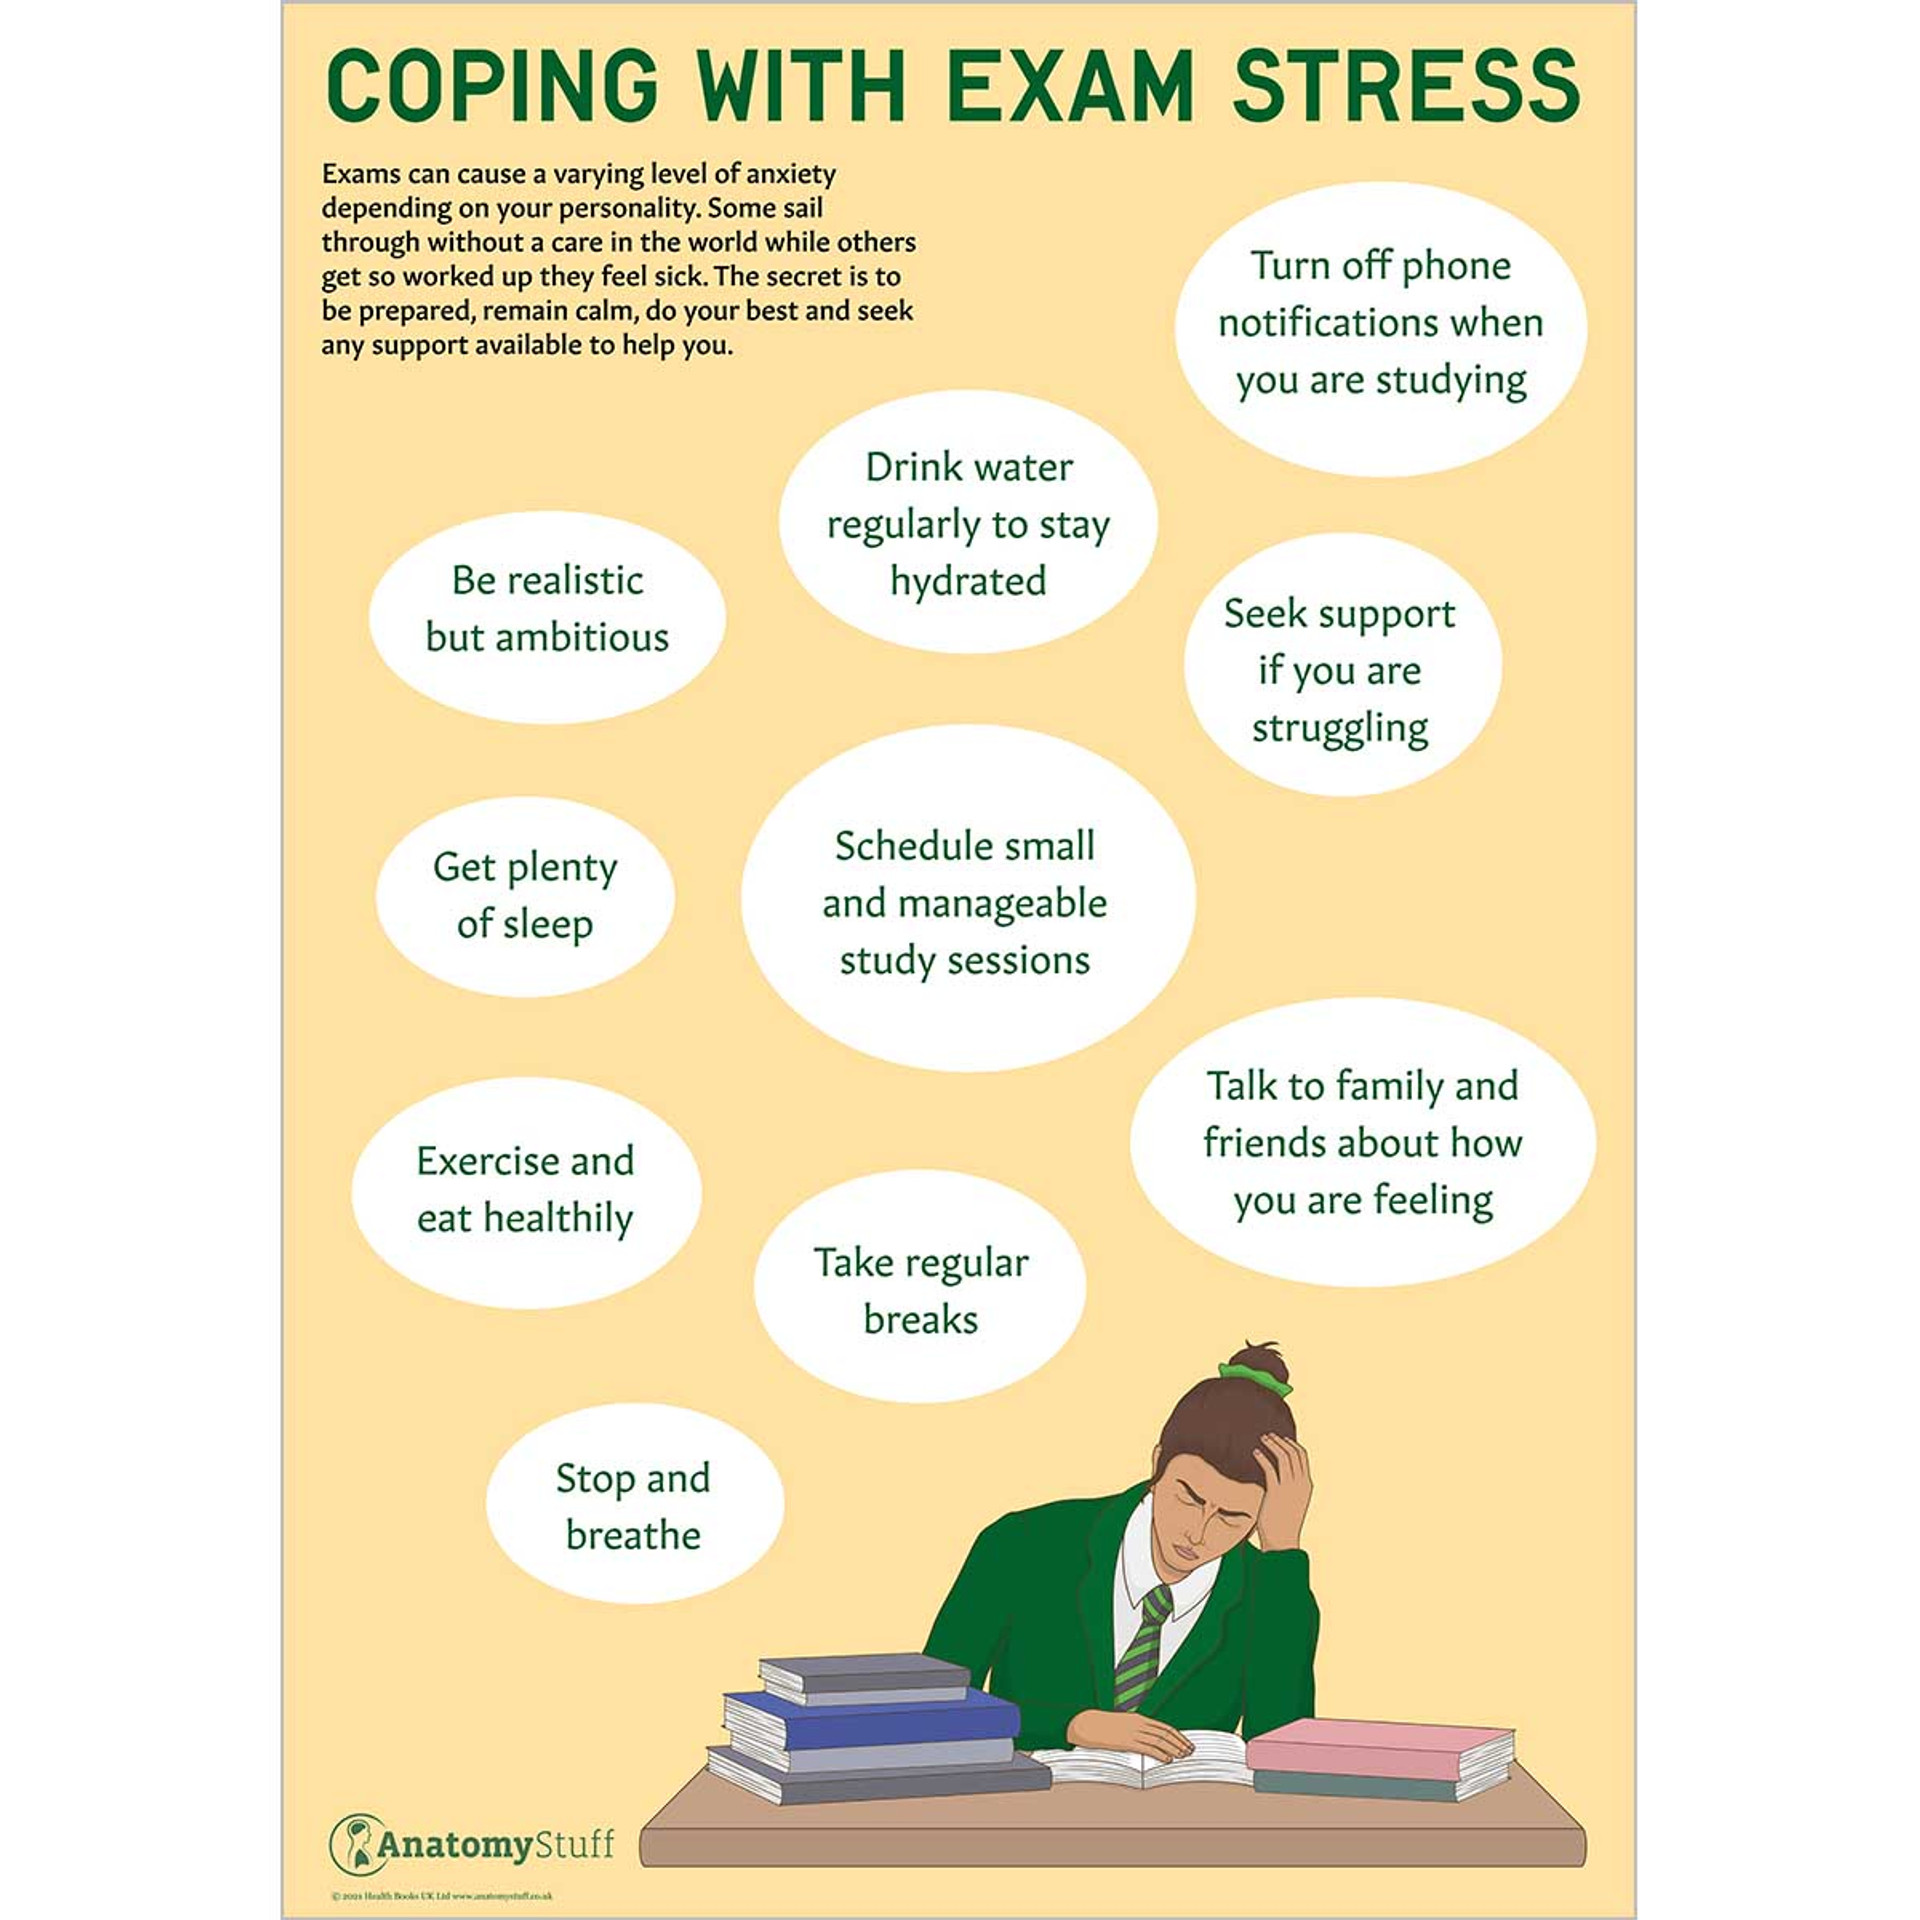 essay on coping with exam pressure in an effective way